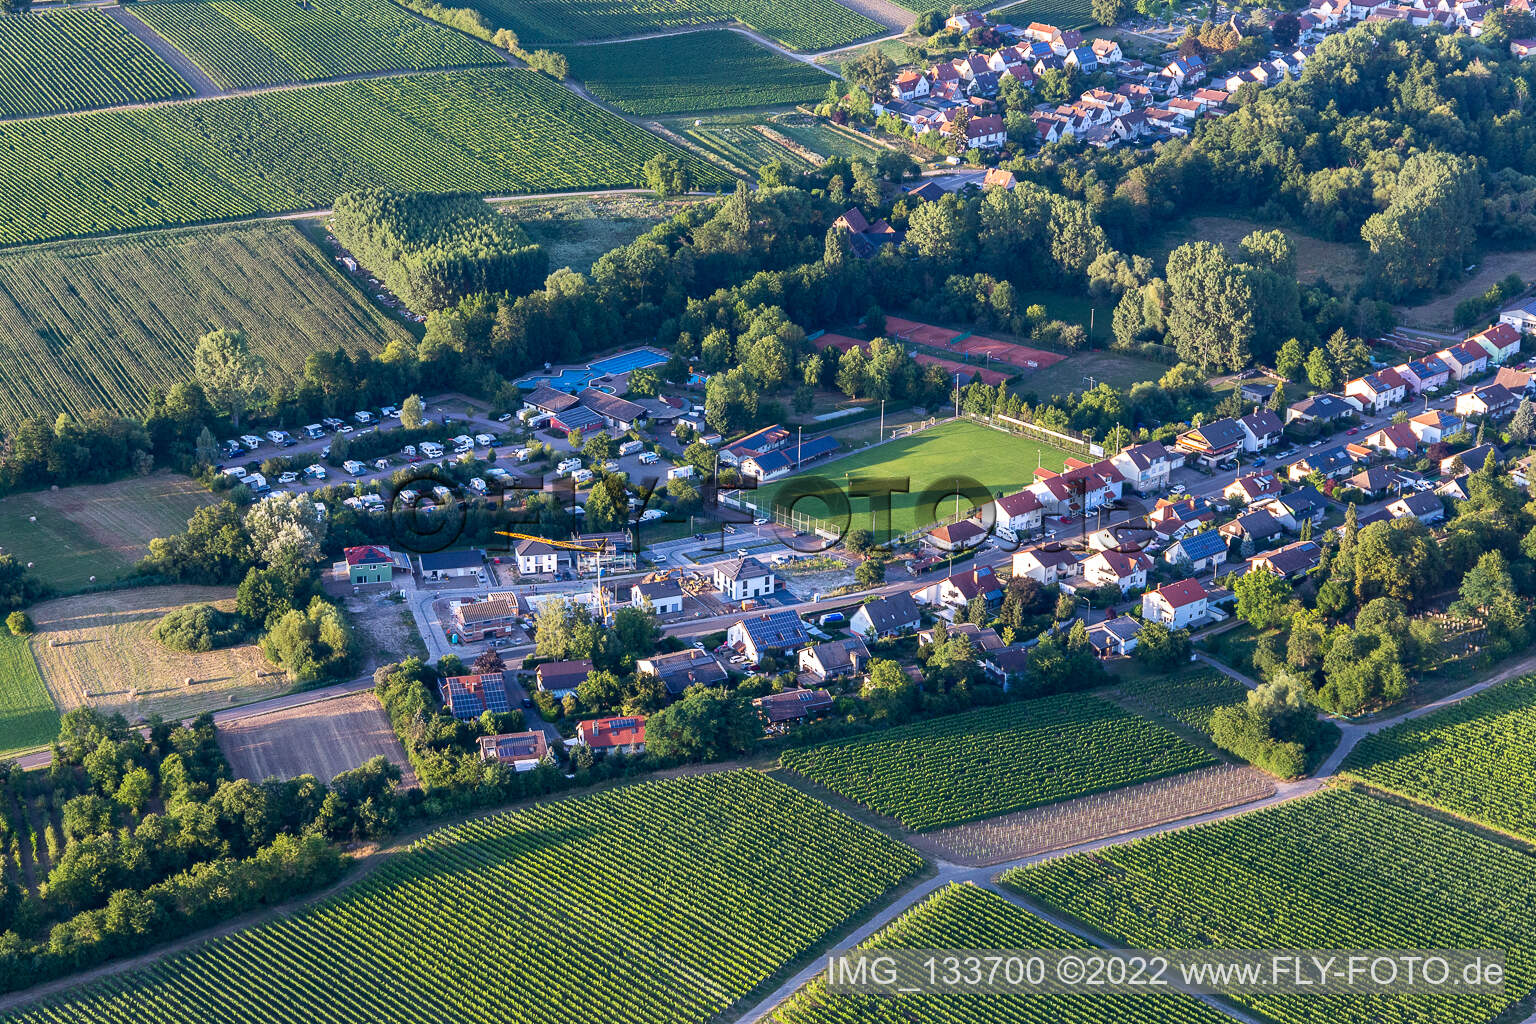 Aerial photograpy of Camping in the Klingbachtal in the district Ingenheim in Billigheim-Ingenheim in the state Rhineland-Palatinate, Germany